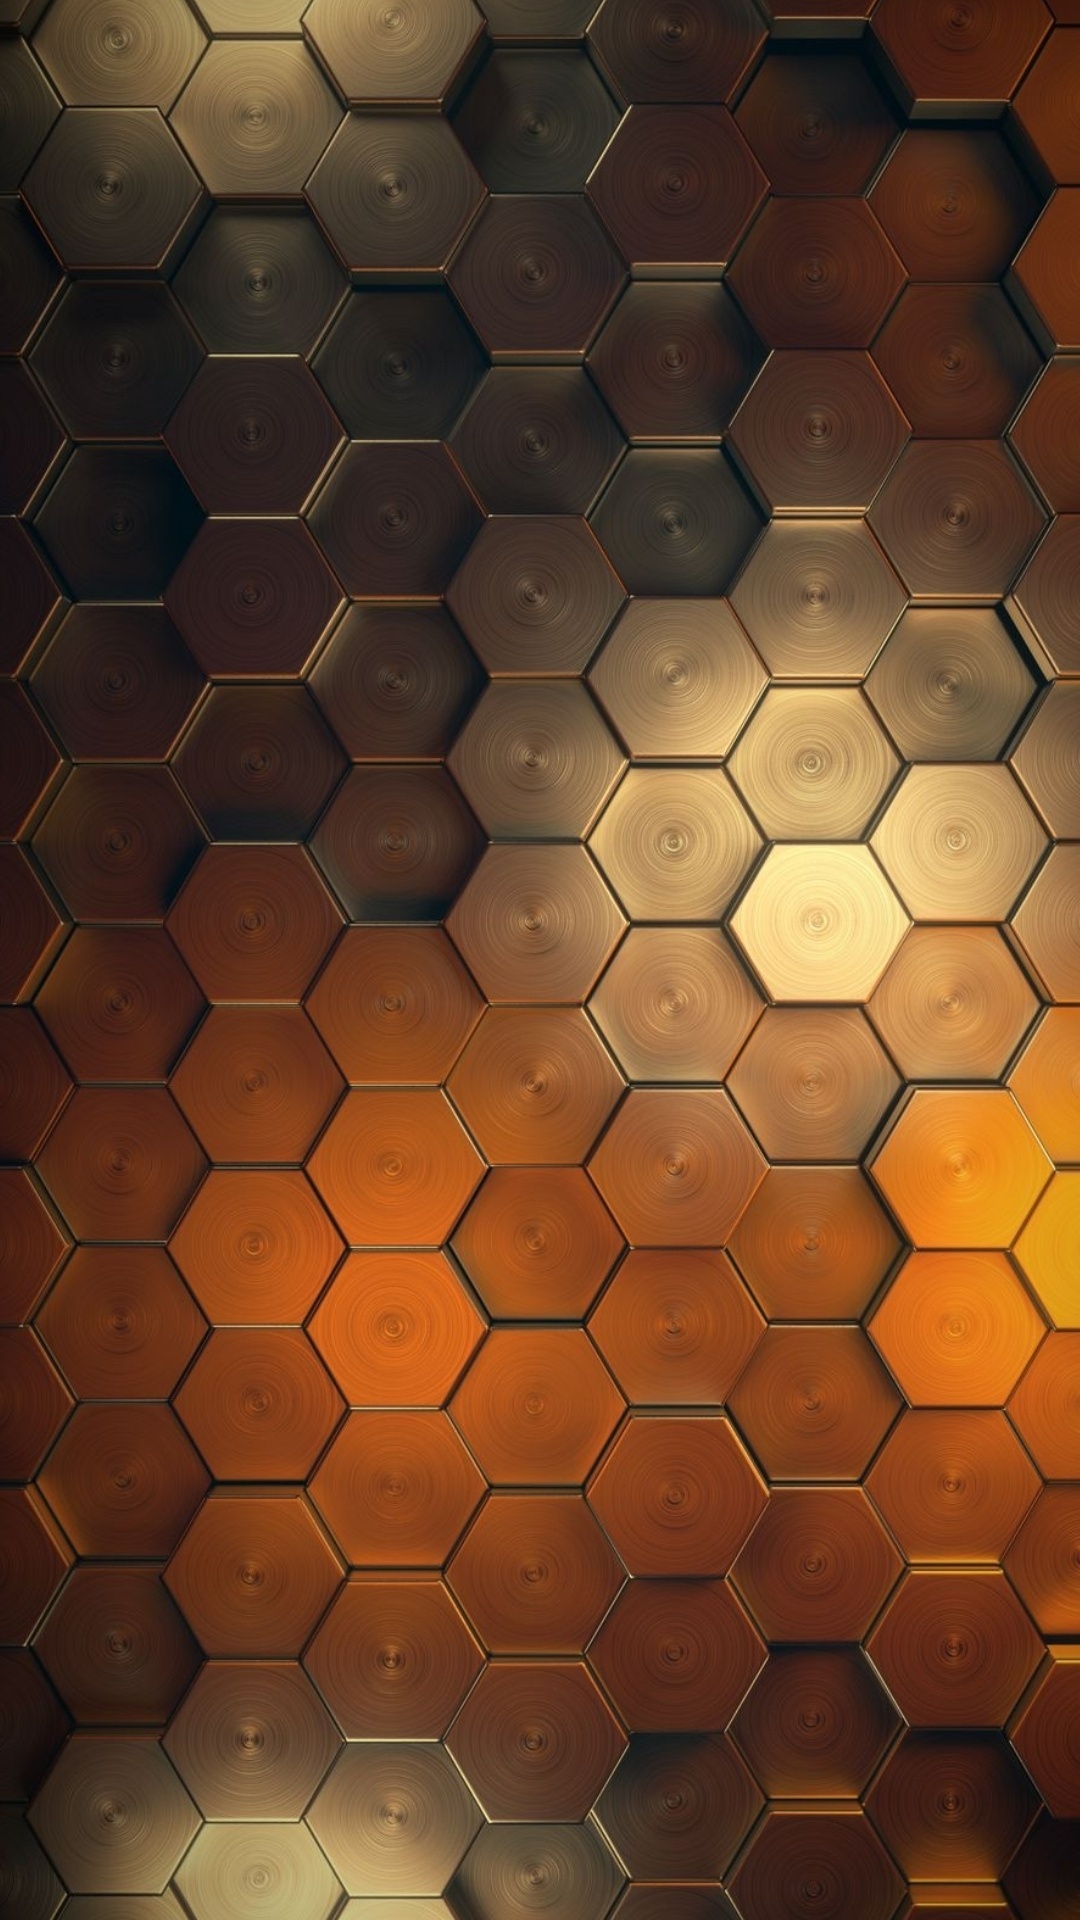 Hexagon wallpapers, Android mobile, Full HD resolution, Vibrant colors, 1080x1920 Full HD Handy